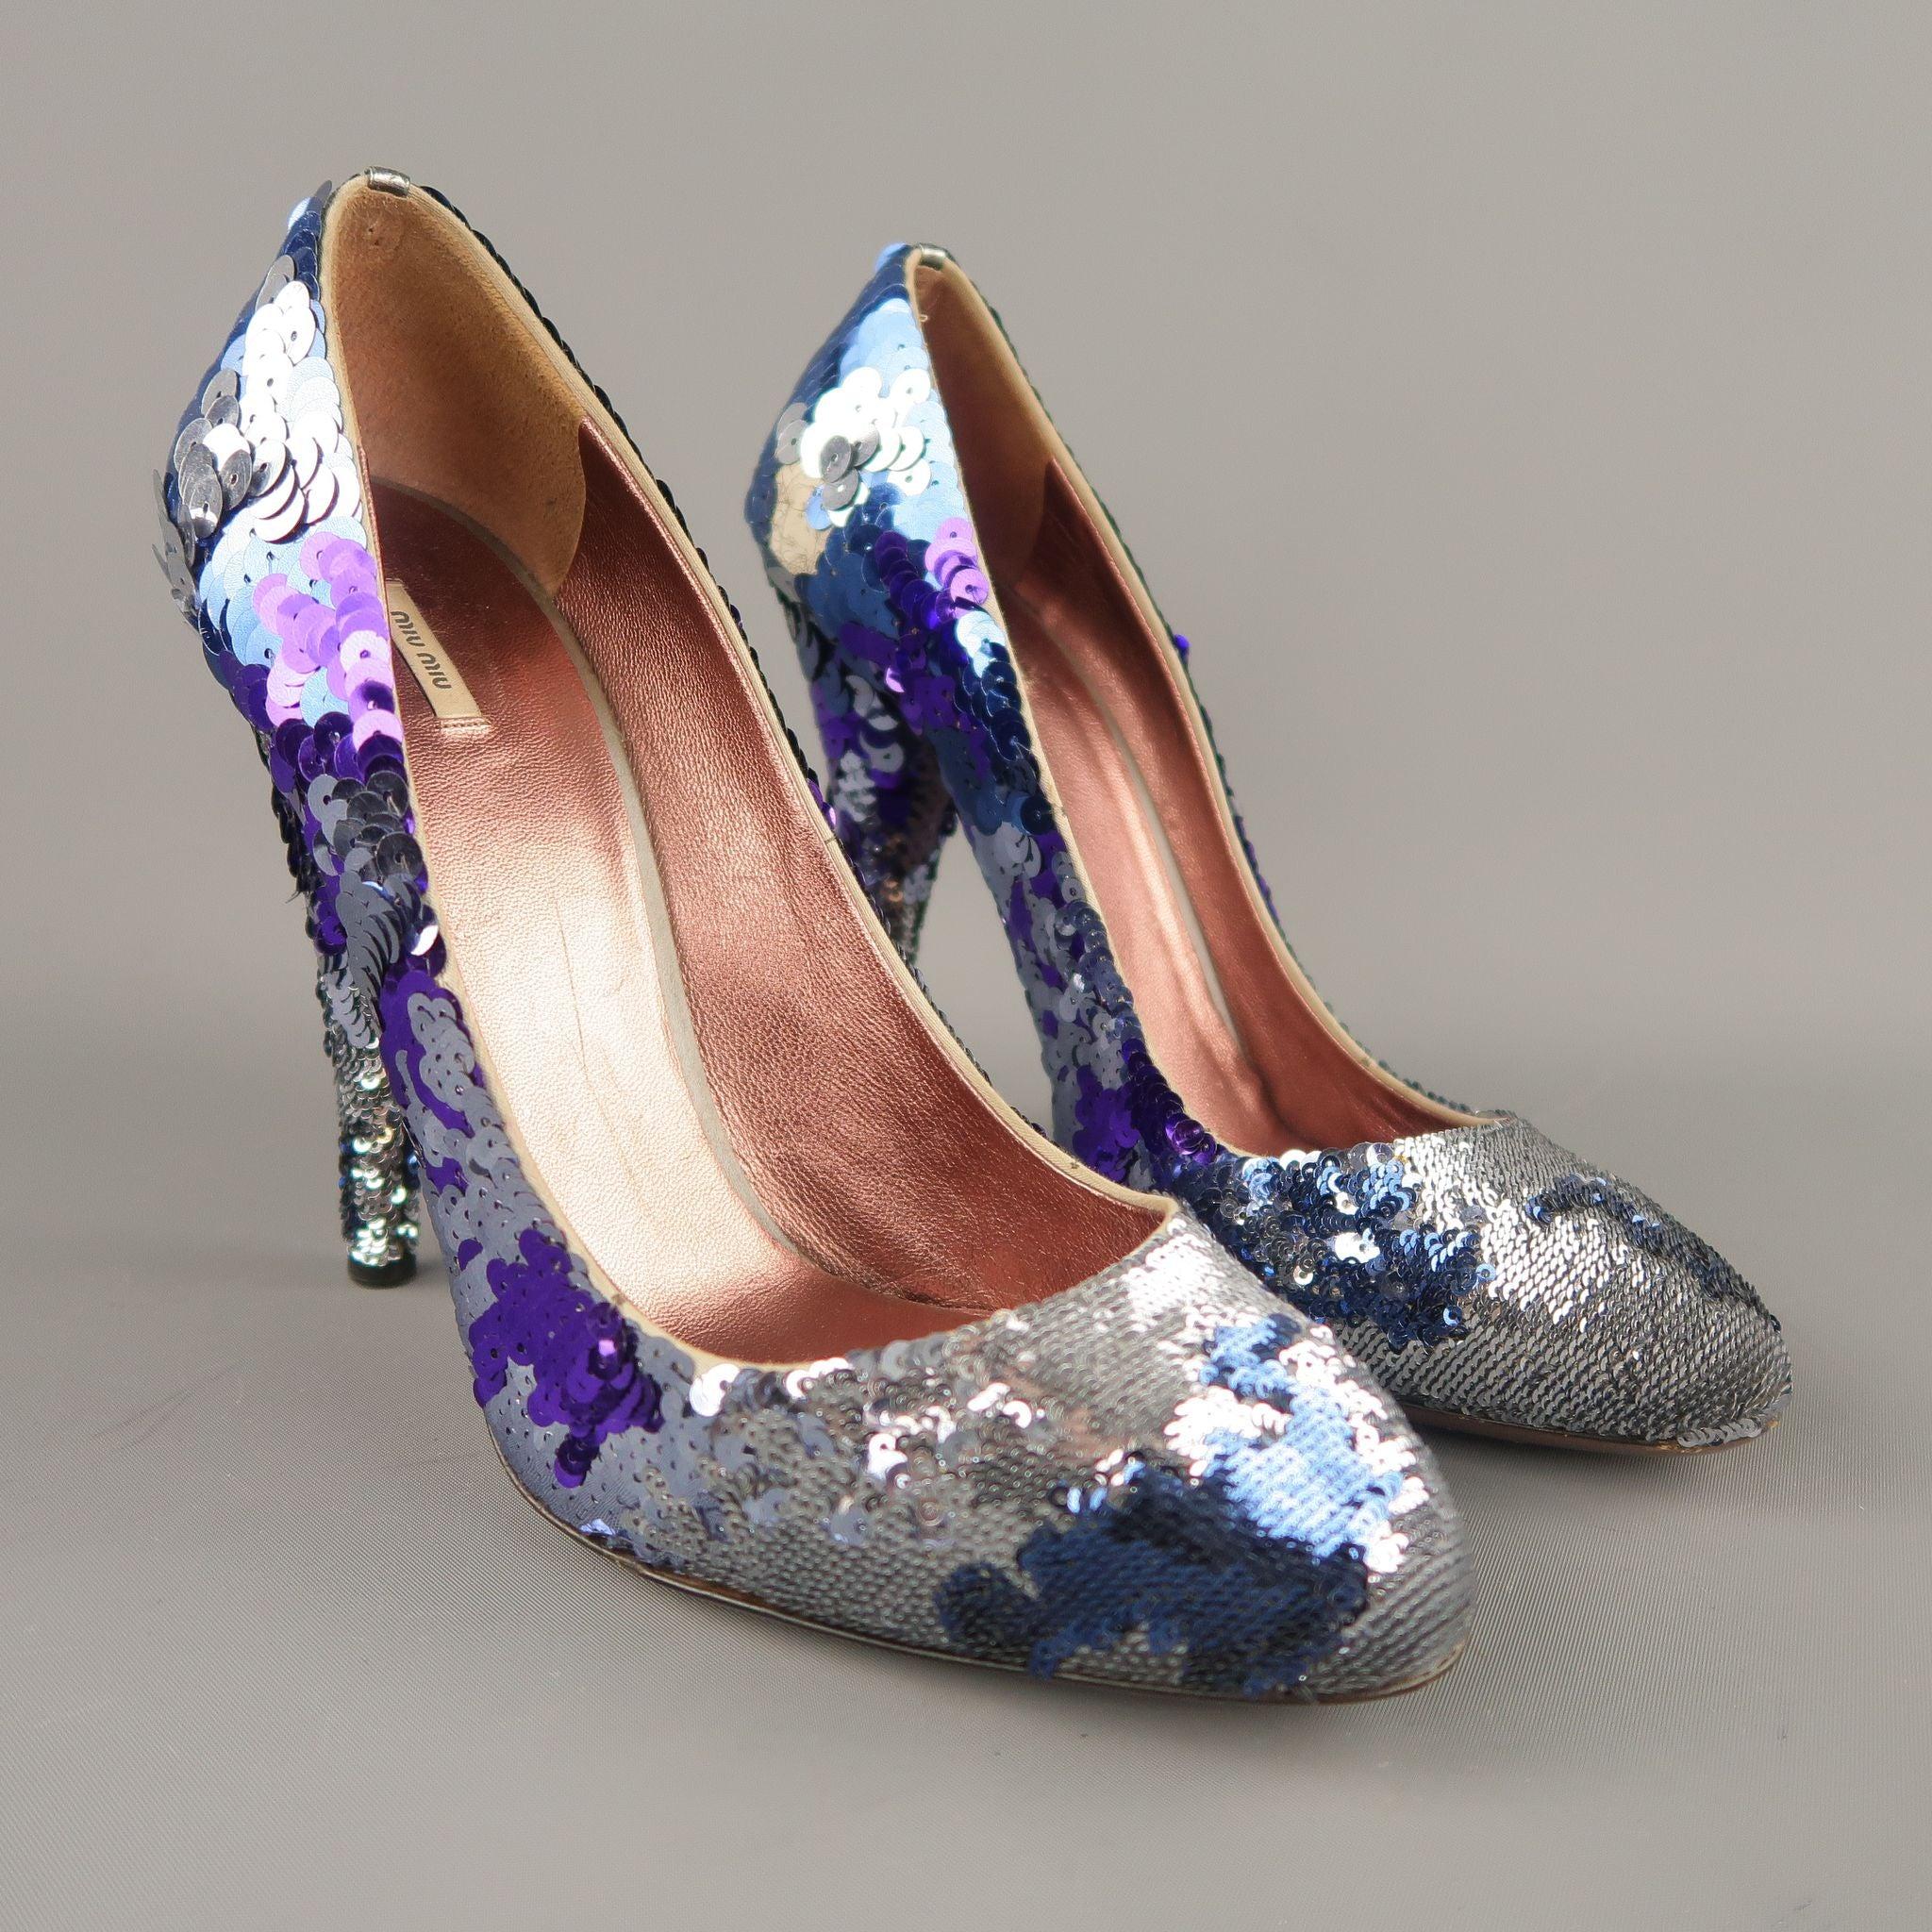 MIU MIU pumps feature silver, blue, and purple sequin overlay in various sizes throughout the entire shoe and heel with a rounded point toe. Small patch of missing sequin on inner heel. As-is. Made in Italy.Good Pre-Owned Condition. 

Marked:   IT